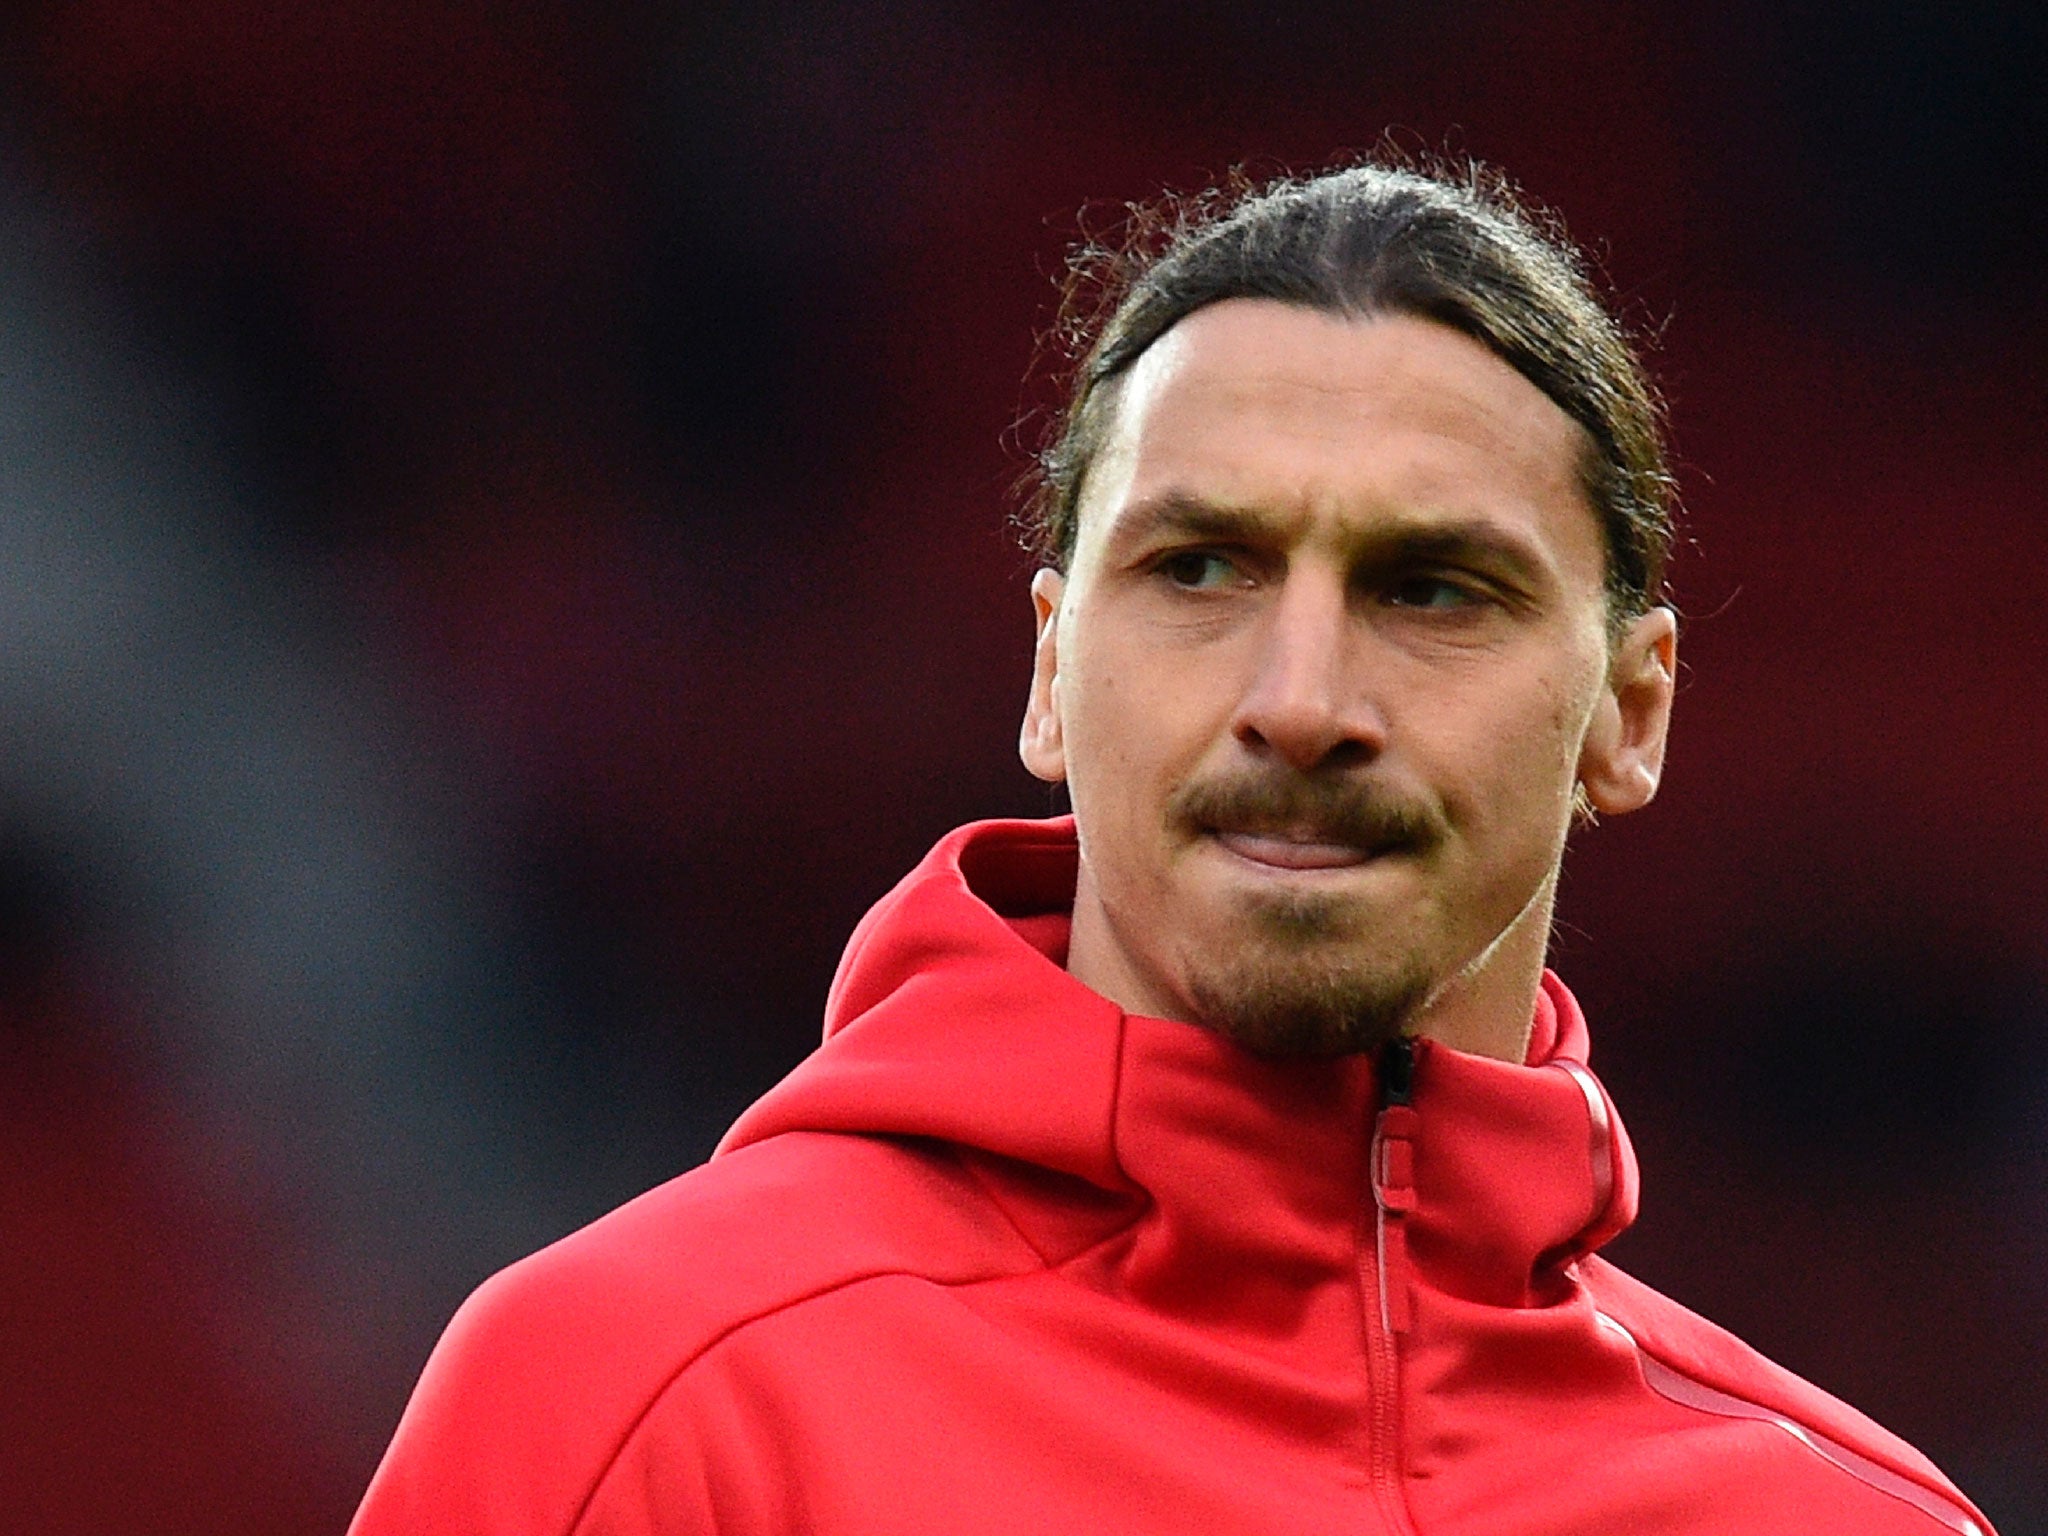 Zlatan Ibrahimovic can help Manchester United win the Europa League even though he's not playing